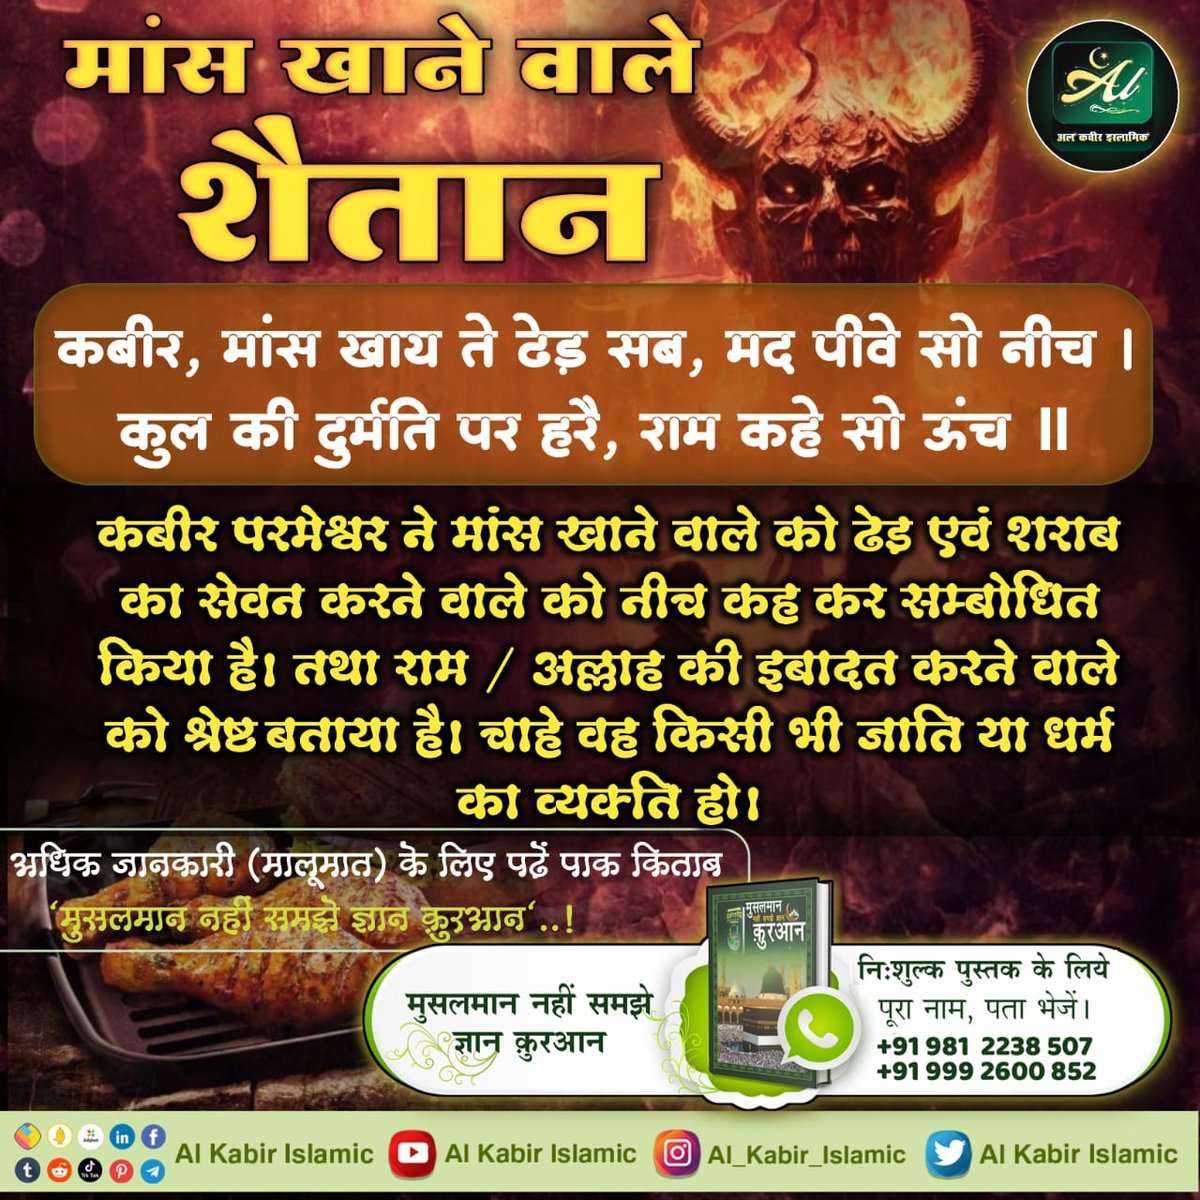 #RealKnowledgeOfIslam Hindu or Muslim meat eater devil God Kabir has said that Hindus commit violence with a jolt. Muslims kill creatures slowly. It is called Halal Kiya. This is sin. Both will be in bad shape.